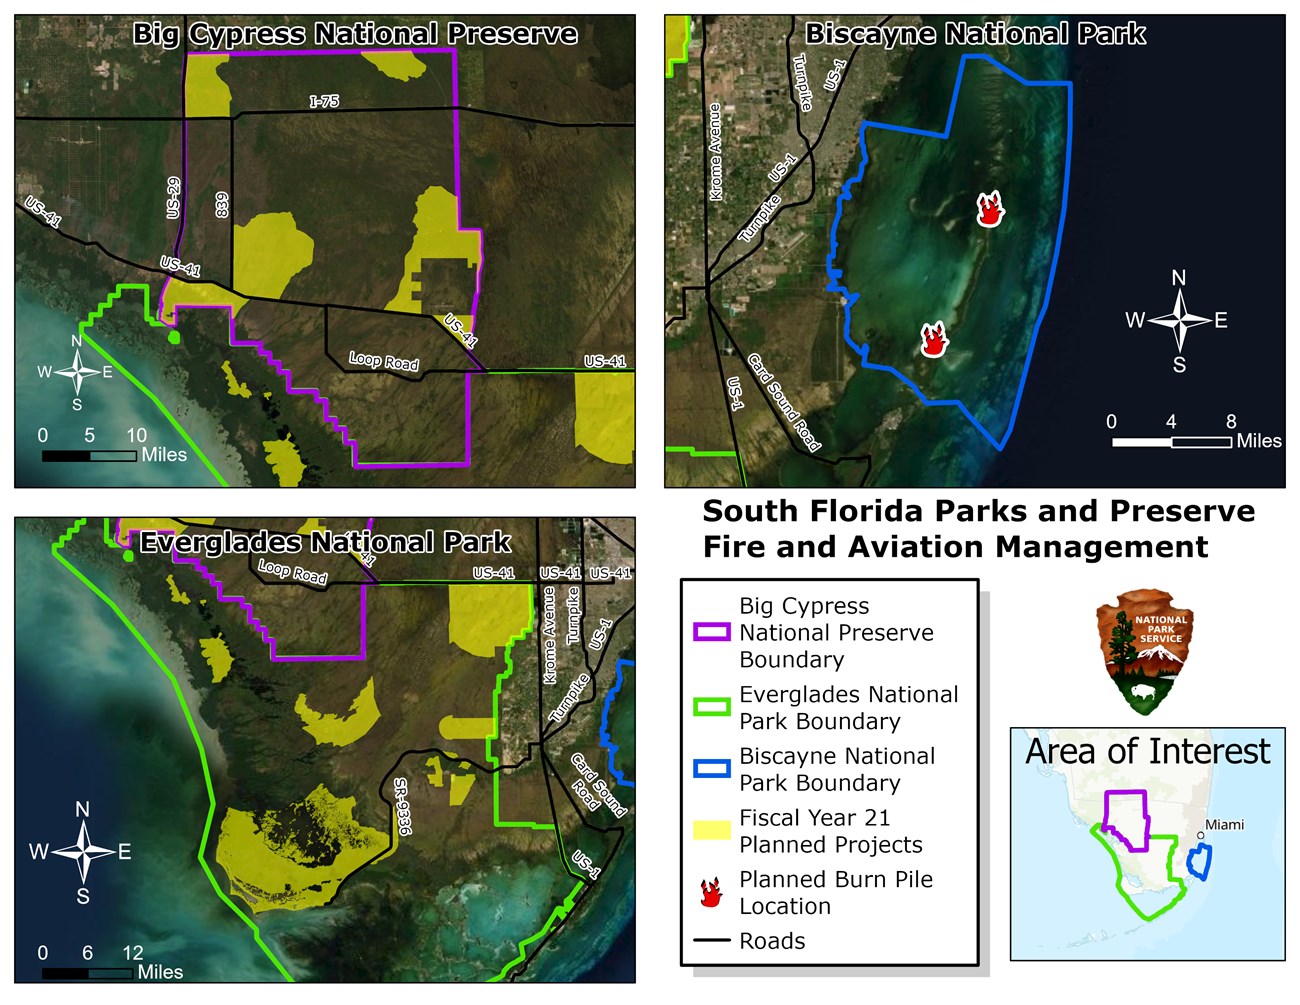 Maps of each NPS unit show planned areas for prescribed burn treatments. Email ever_information@nps.gov for more information about these maps.